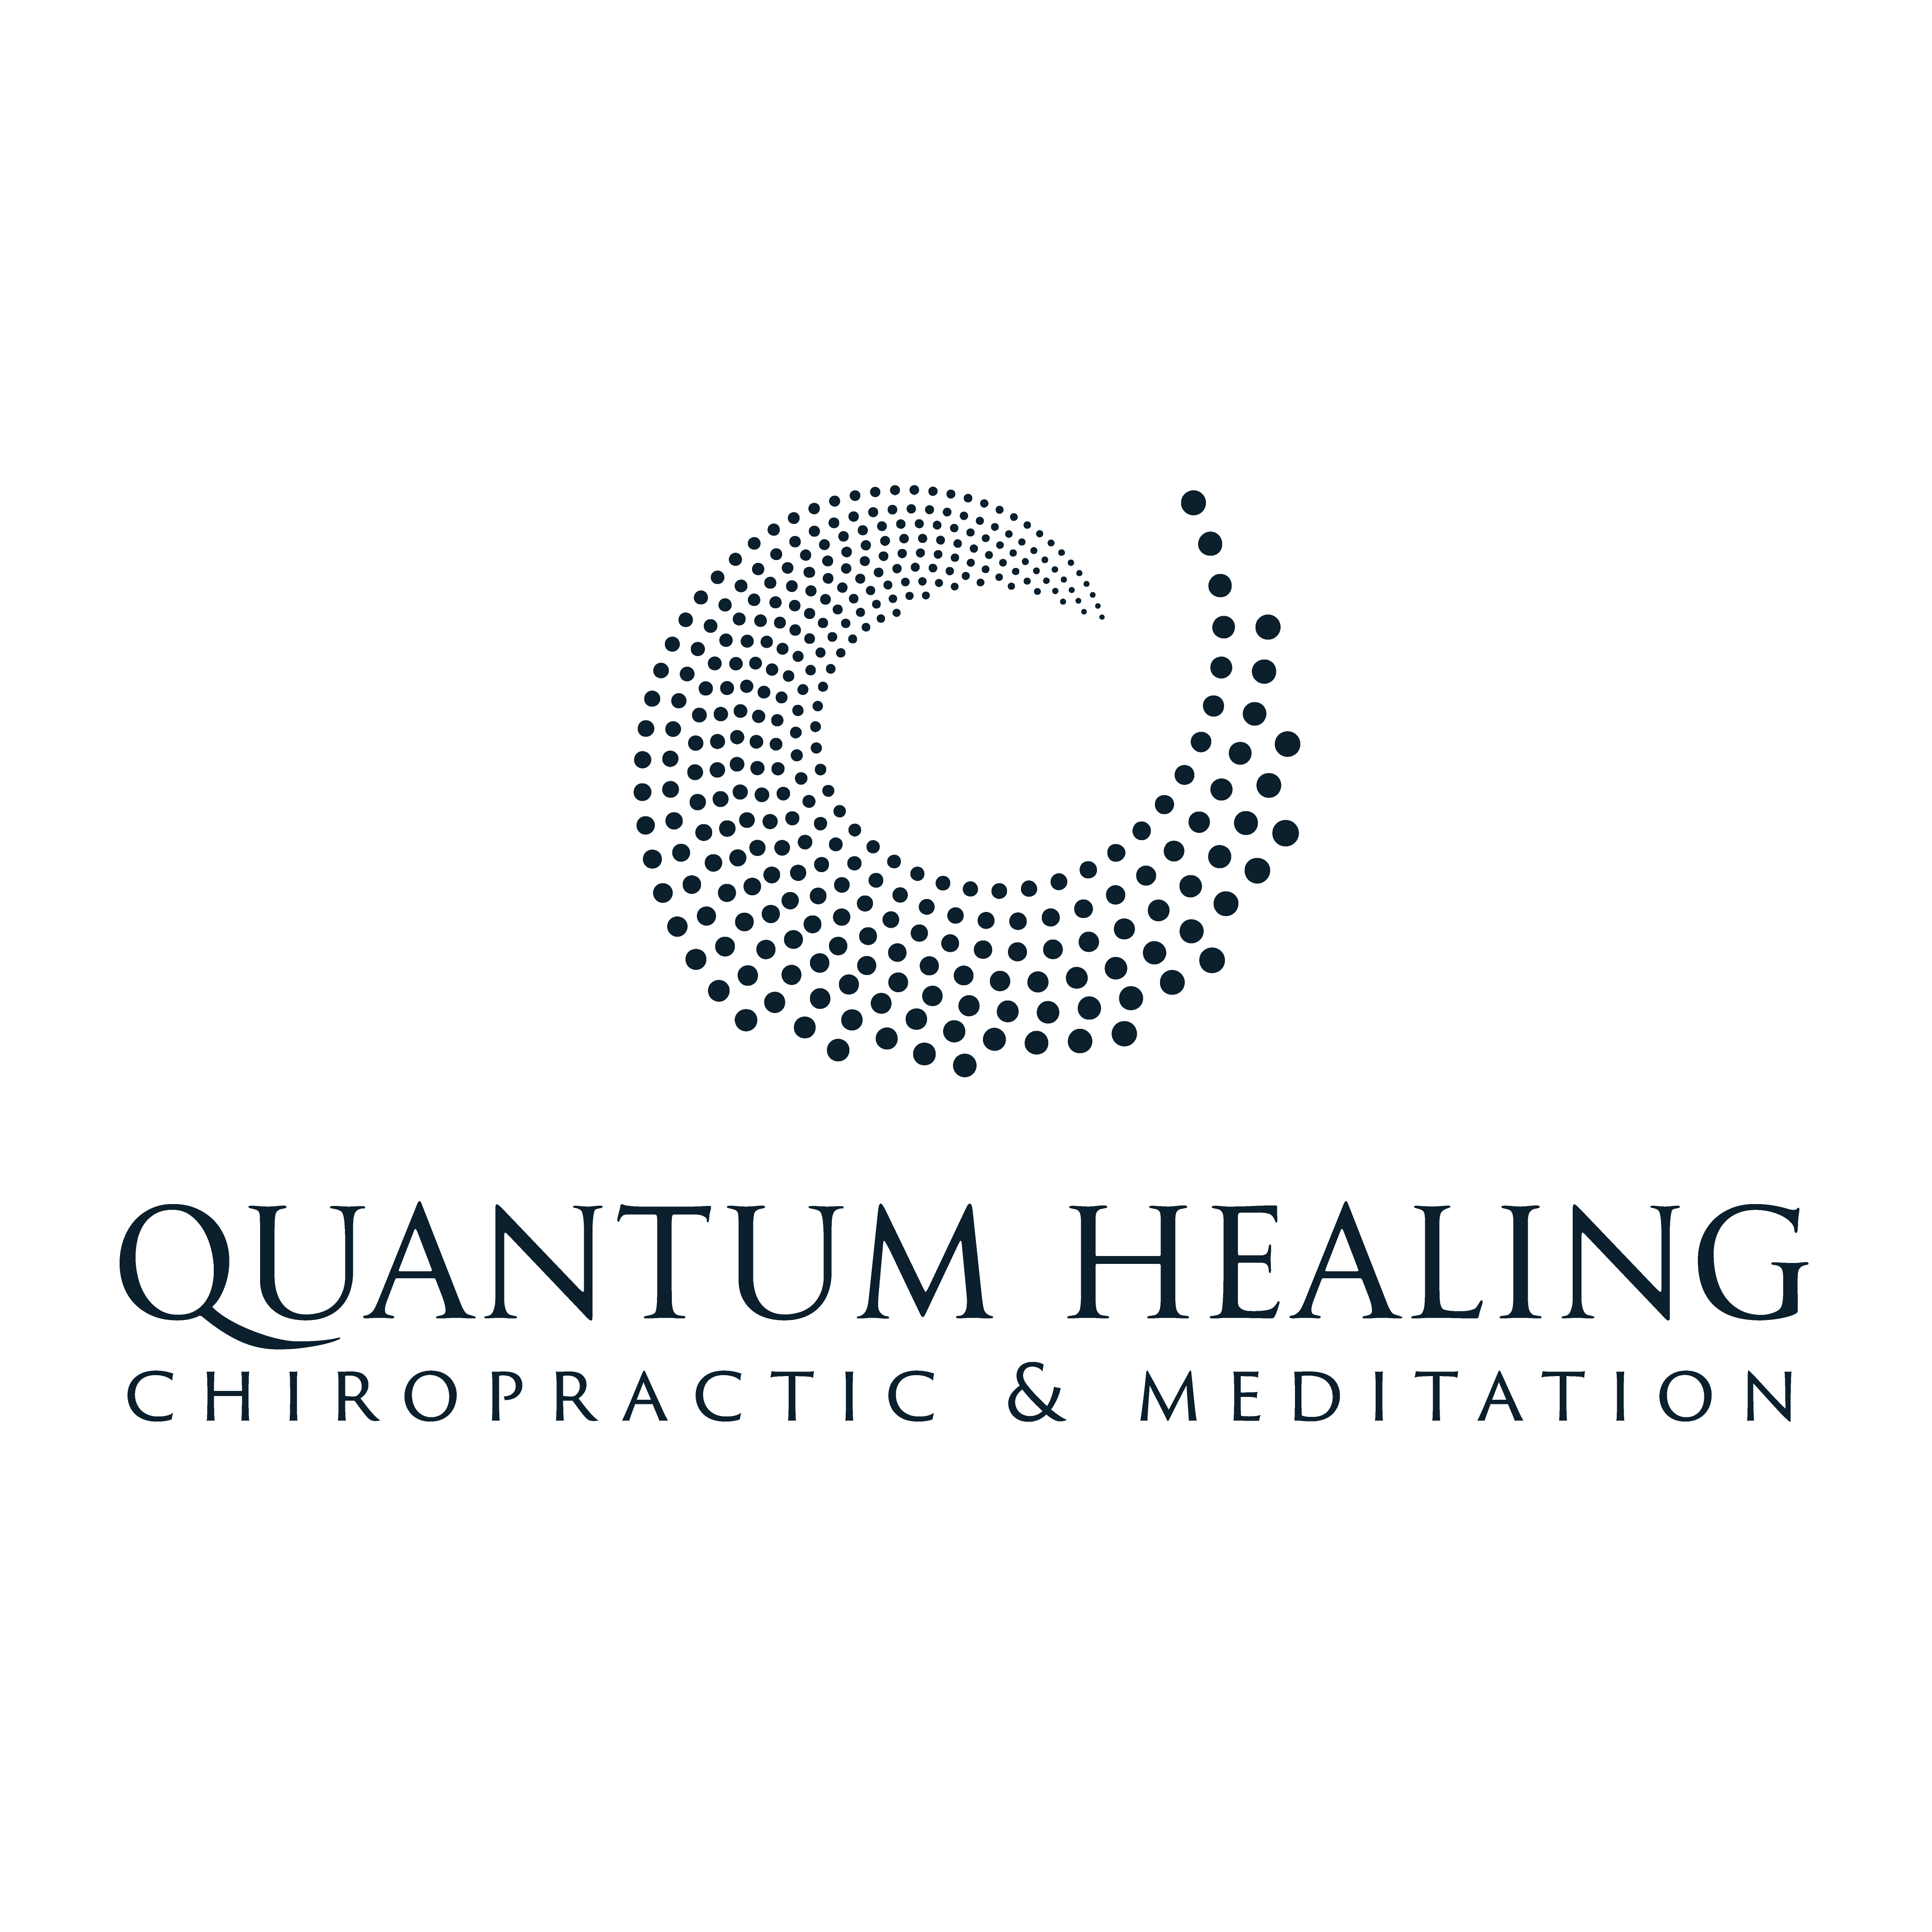 Quantum Healing Chiropractic & Meditation Oxenford